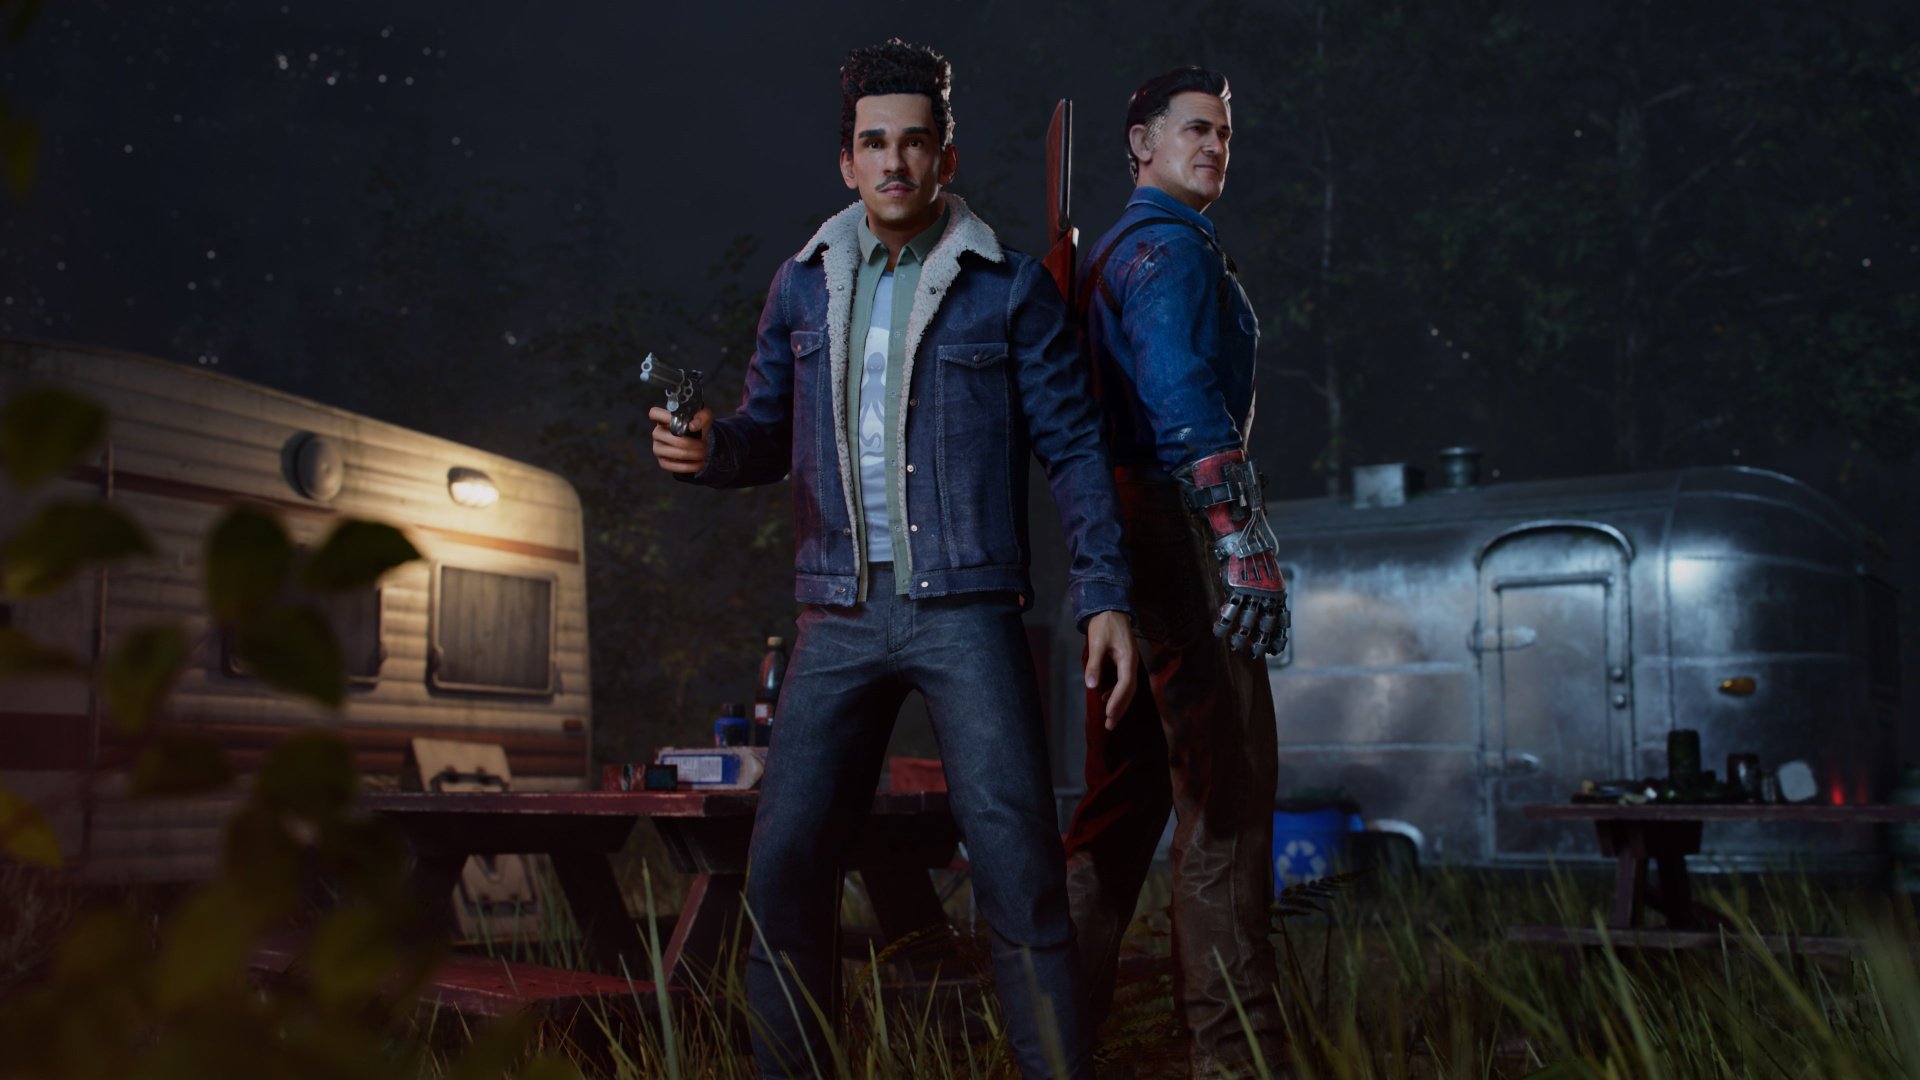 Evil Dead: The Game gets new free-roam mode in Army of Darkness DLC